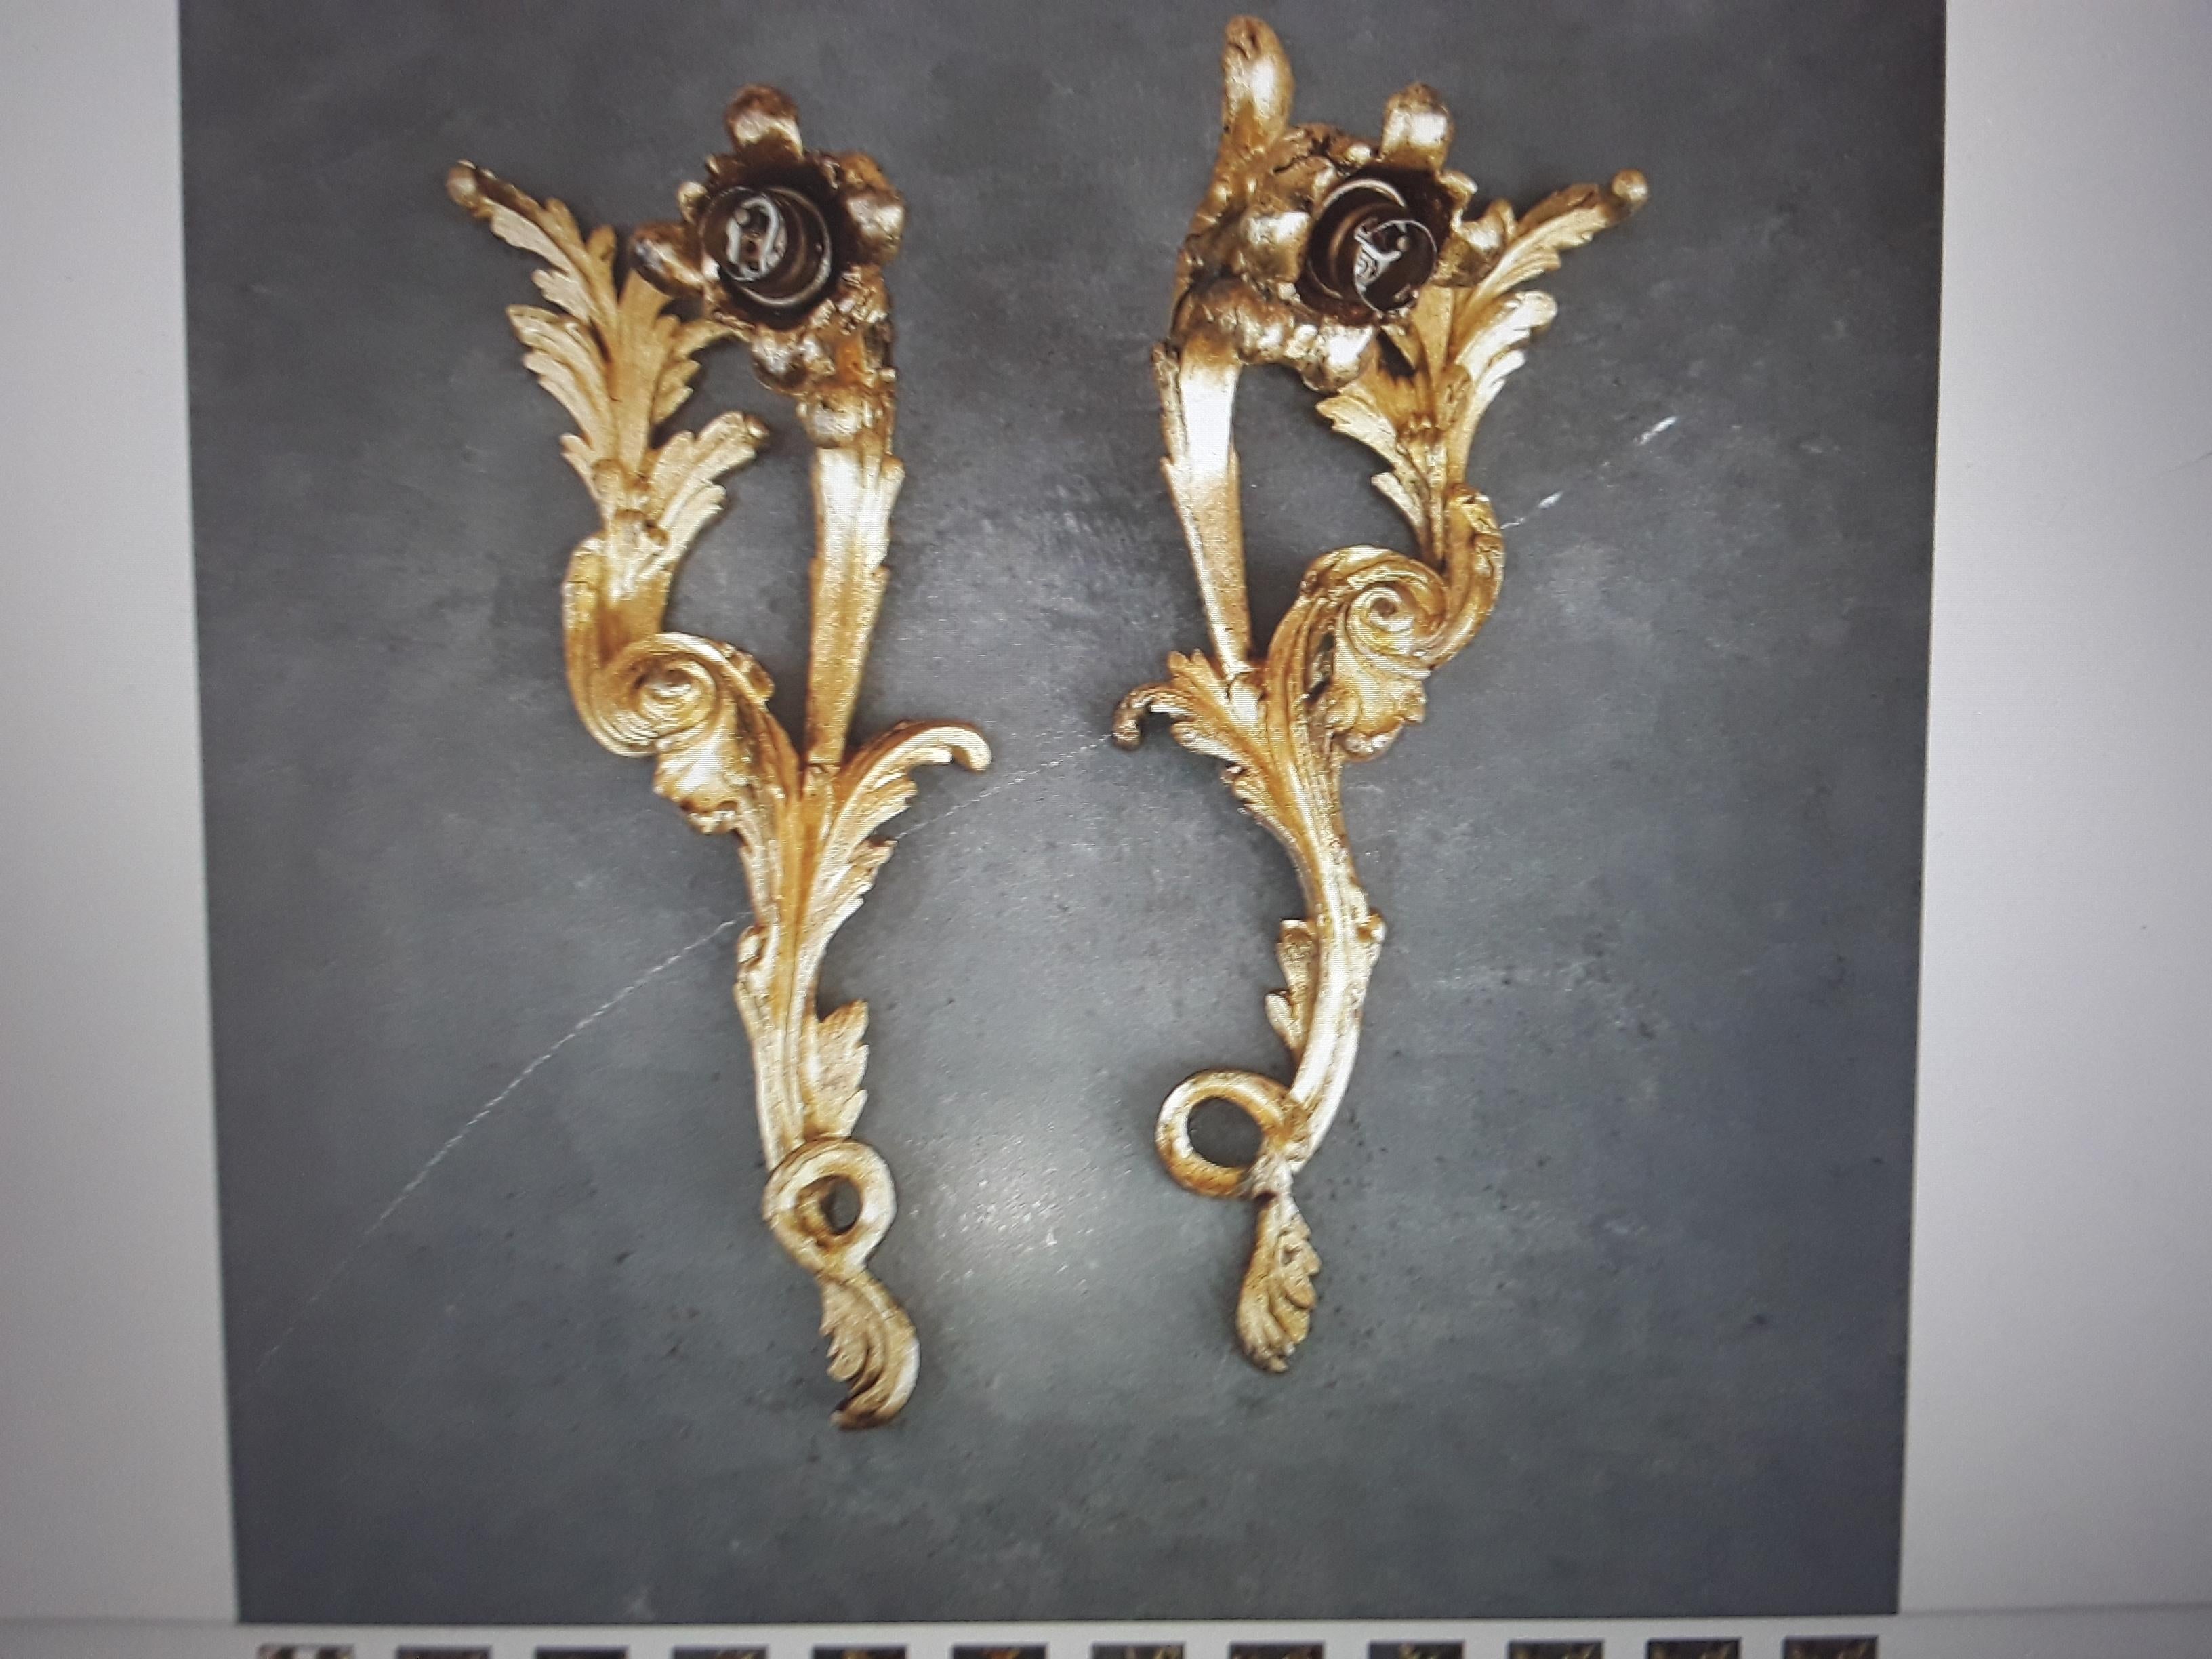 Stunning 19thc French Antique Dore Gilt Bronze Louis XV style Rococo Wall Sconces. This pair is lovely and would make a statement in any room.